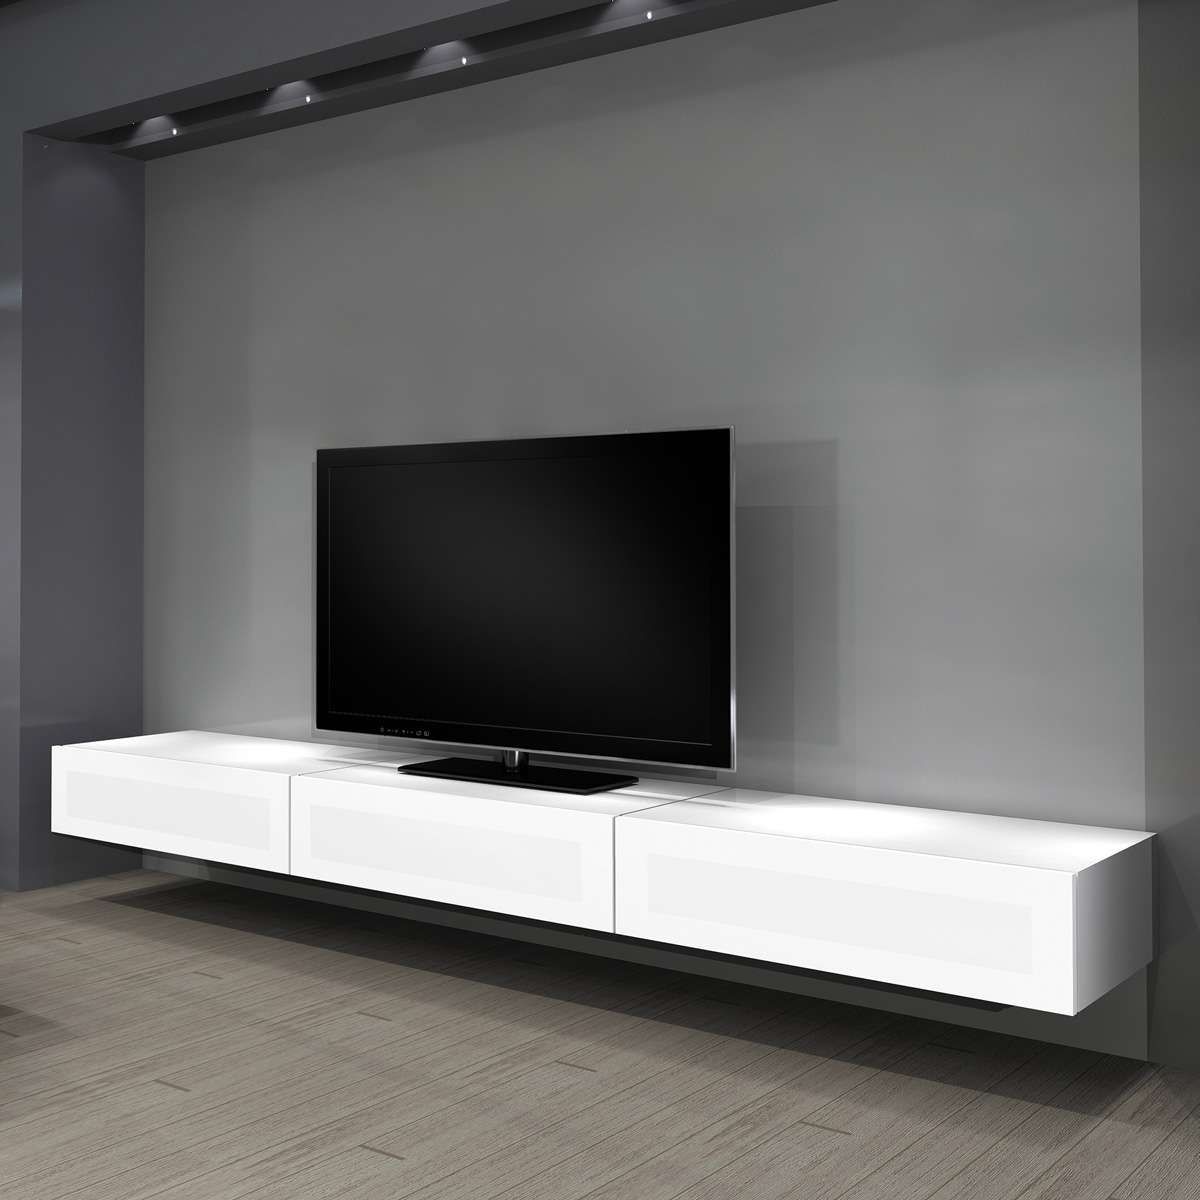 Tv Cabinet With White Wall Mounted Stands Furniture Collection Throughout White Wall Mounted Tv Stands (View 1 of 15)